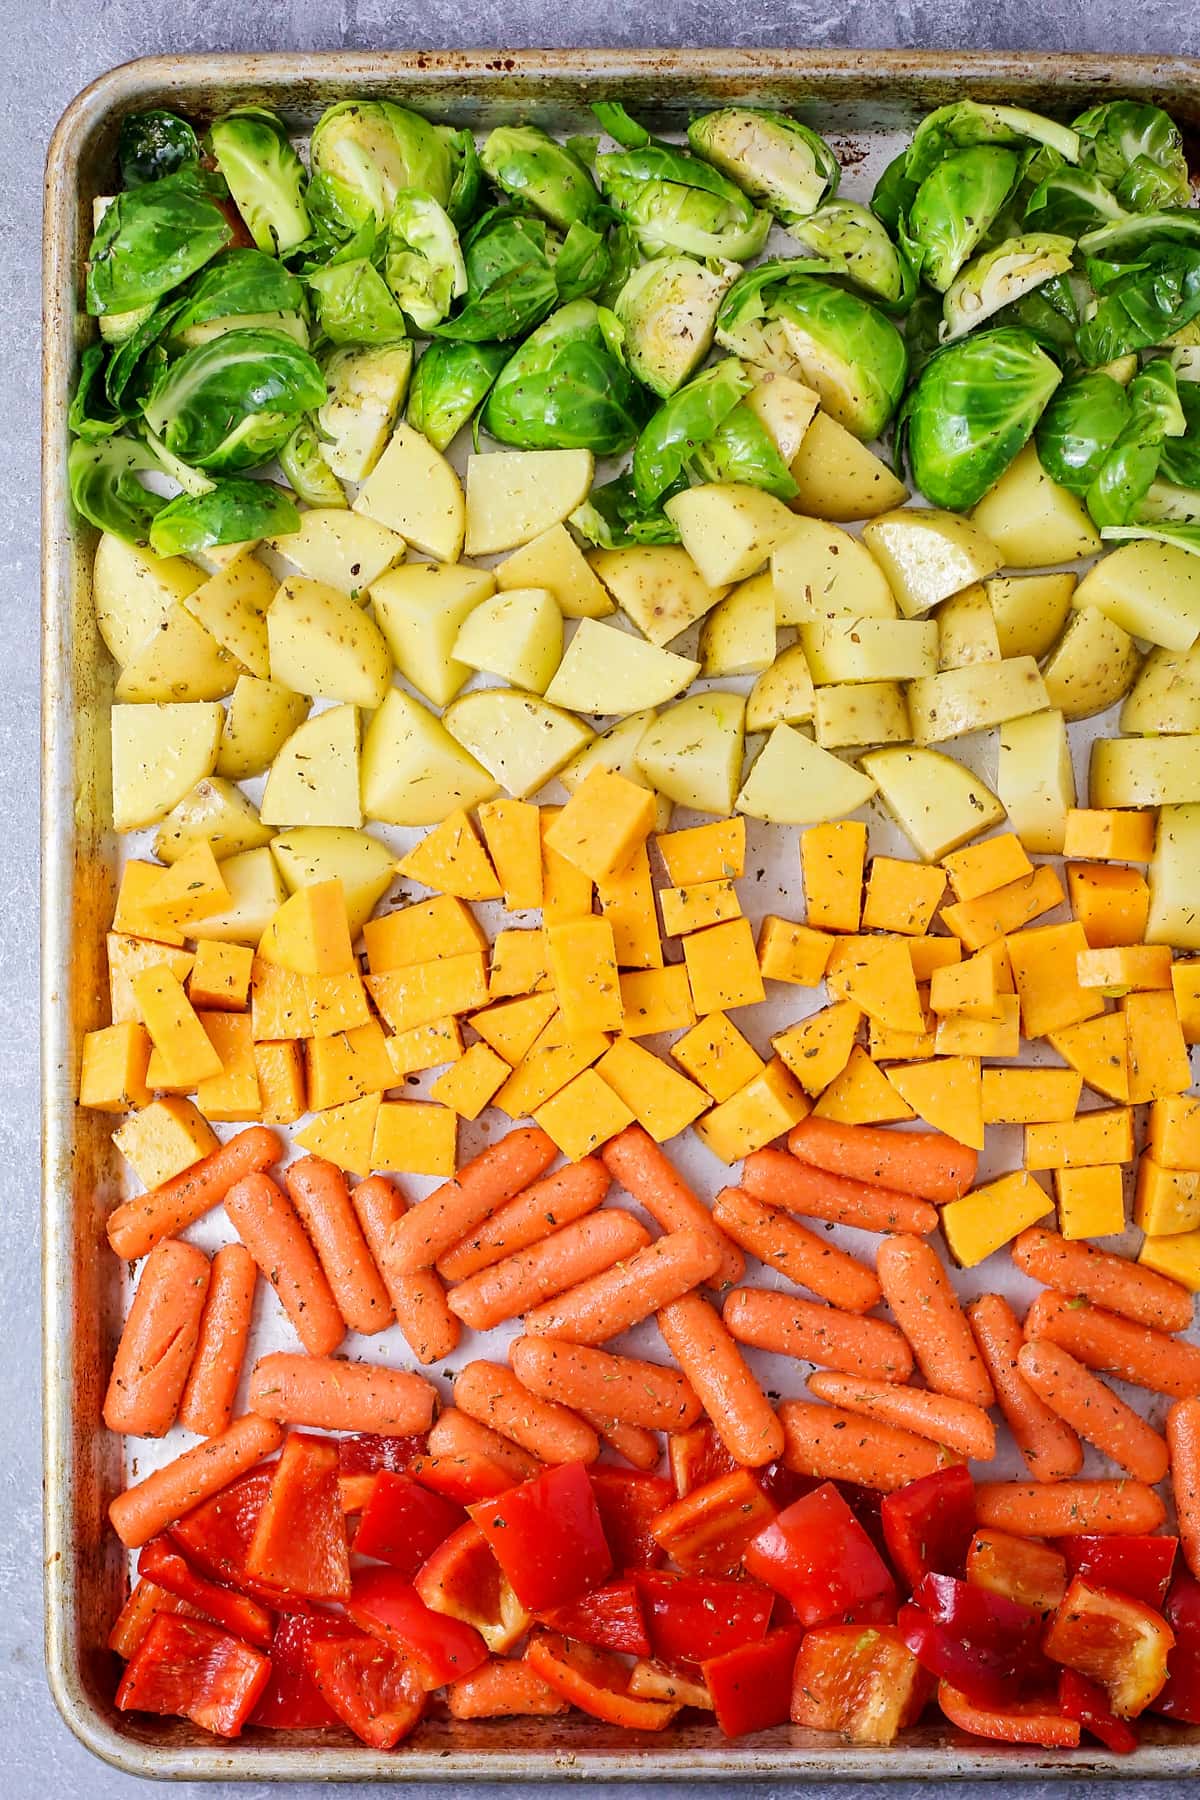 Roasted vegetables in rainbow order on baking sheet ready to be baked.